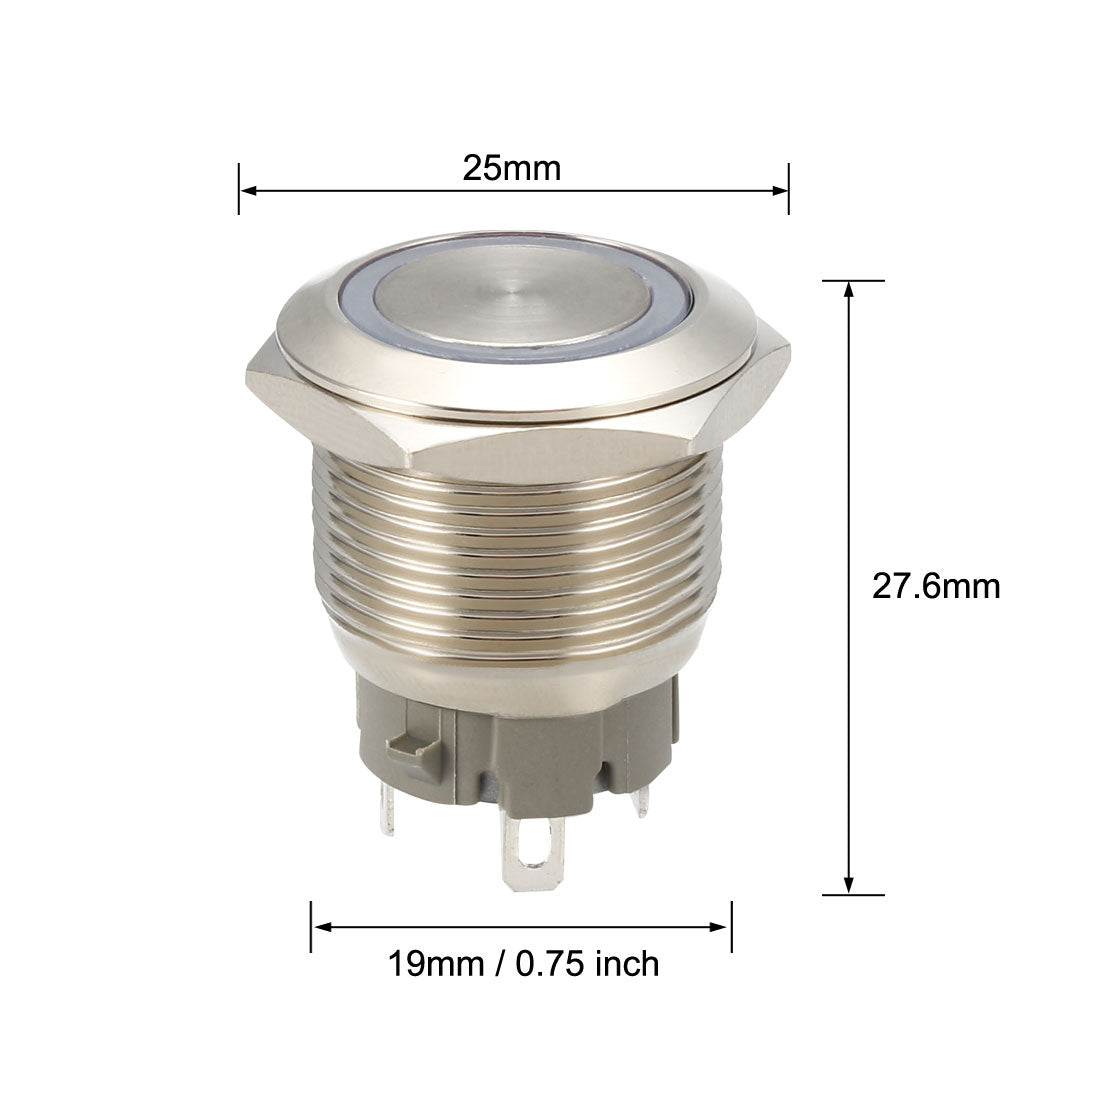 uxcell Uxcell Latching Push Button Switch 19mm Mounting 1NO 12V White LED with Socket Plugs